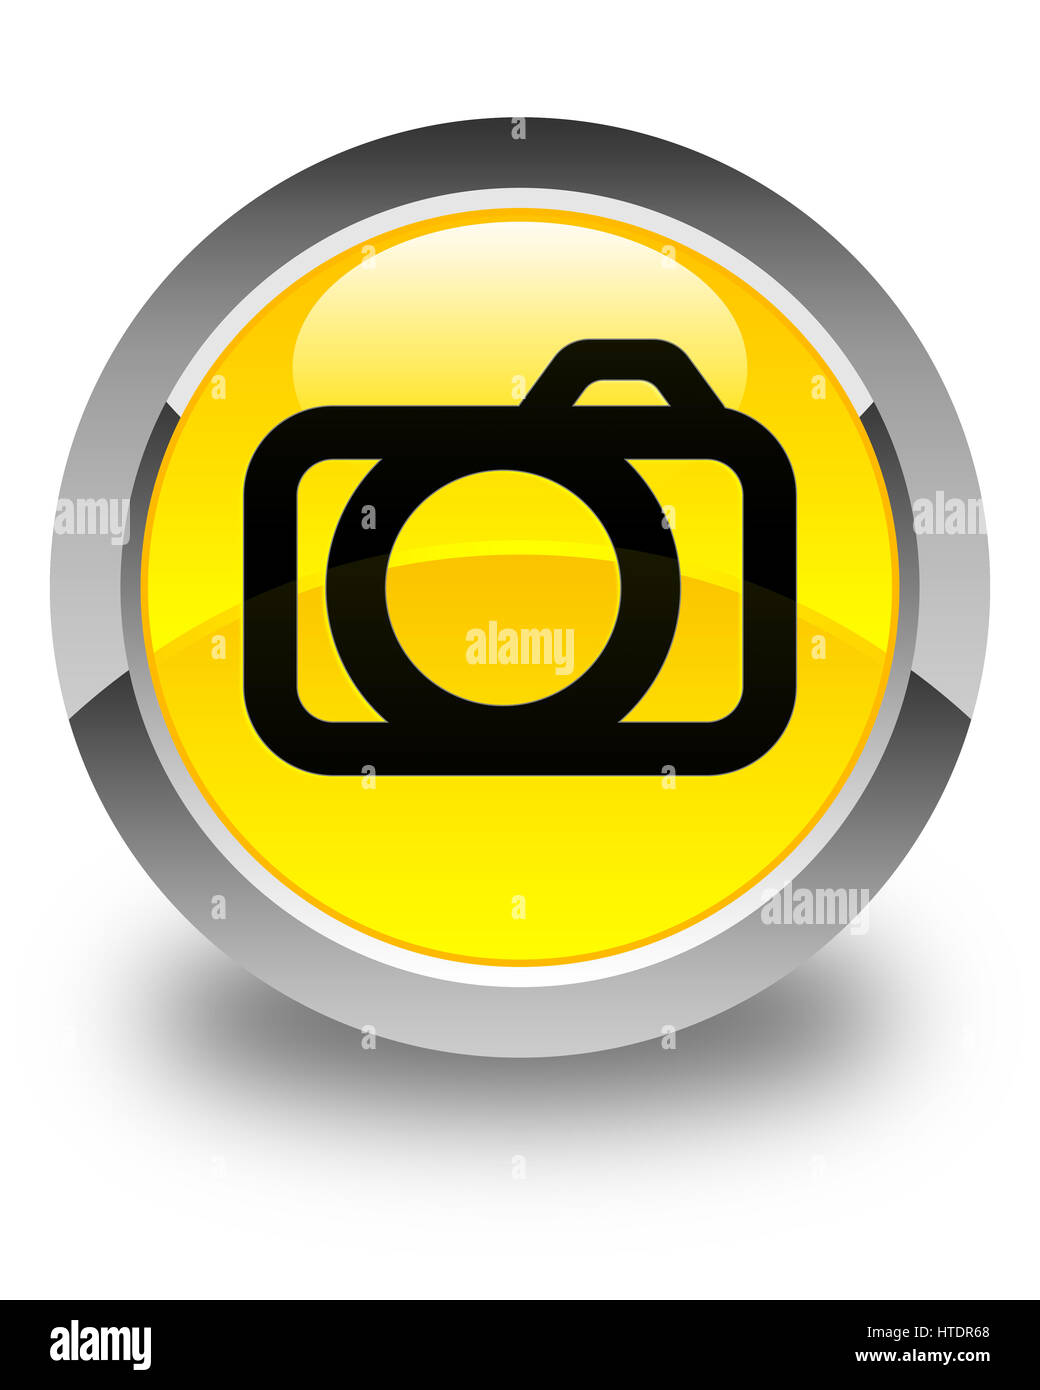 Camera icon isolated on glossy yellow round button abstract illustration Stock Photo